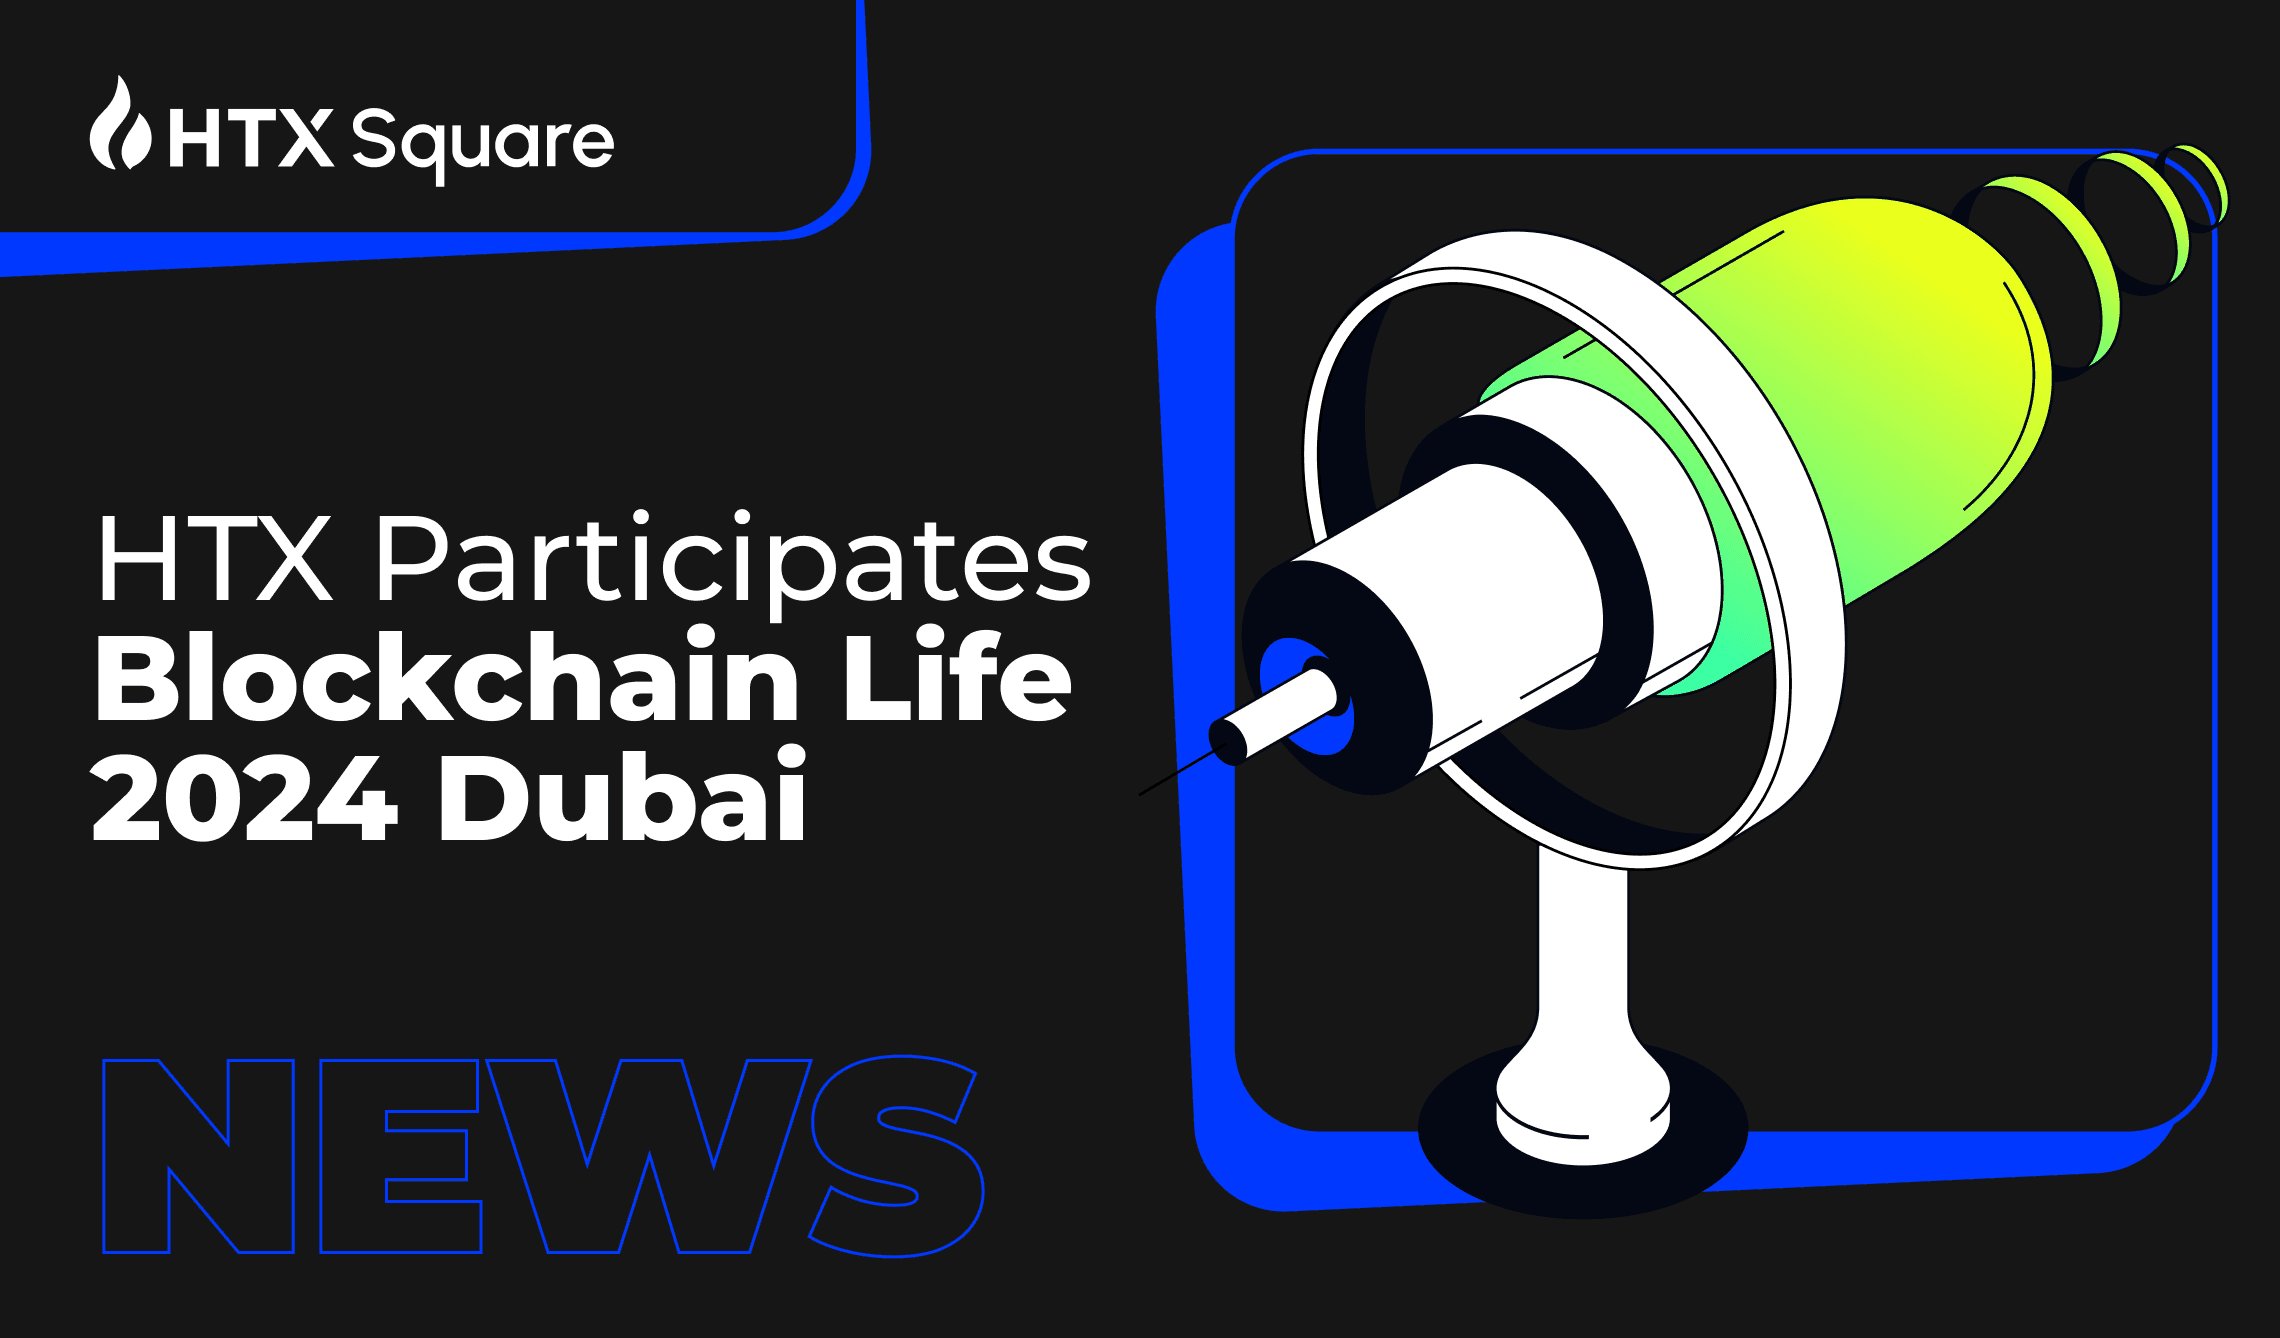 HTX Participates as Sponsor in Blockchain Life 2024 Dubai, Driving Conversations on Cryptocurrency Adoption